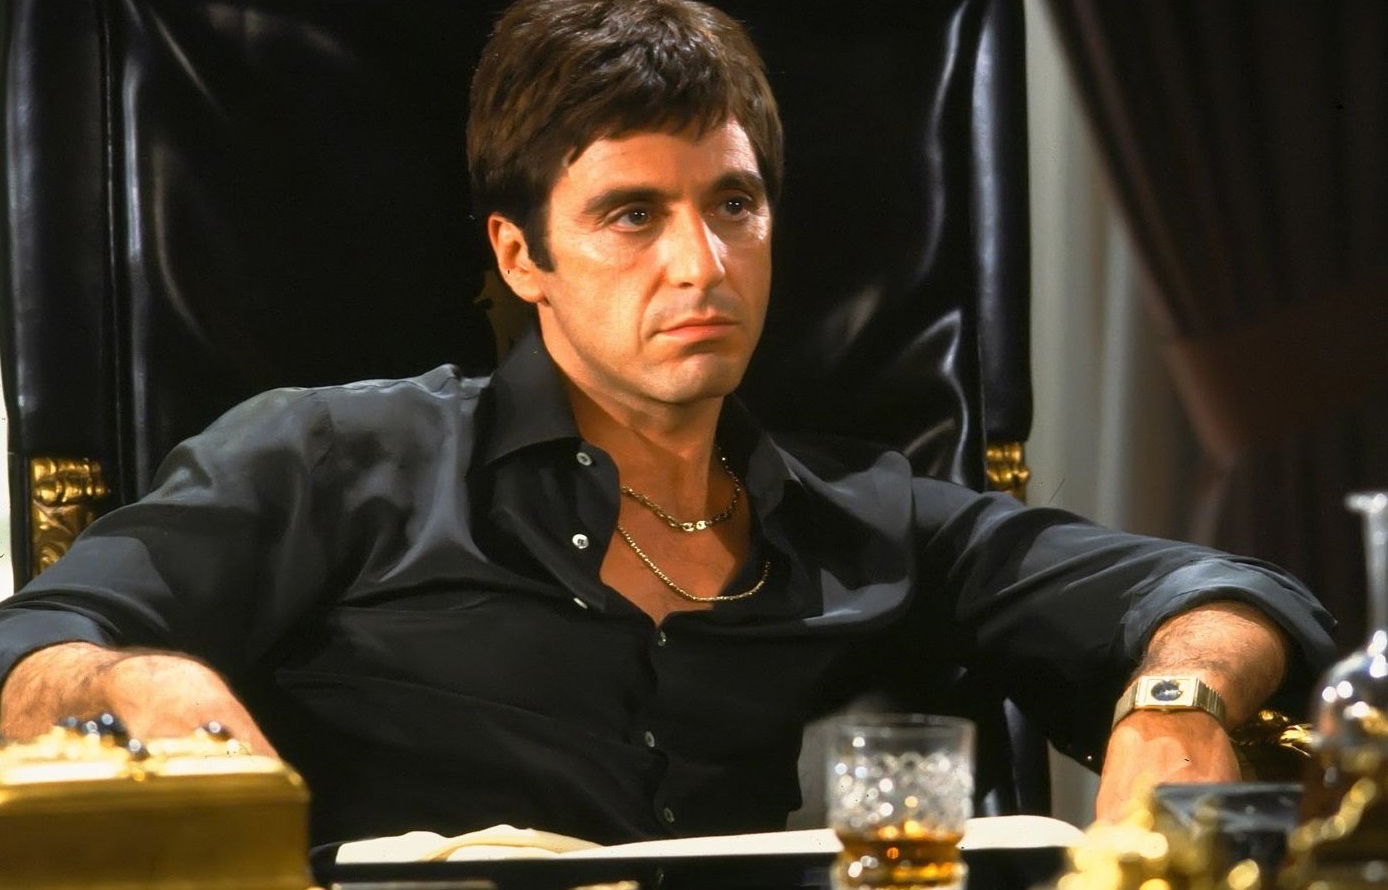 Why Is The Movie “Scarface” So Popular?